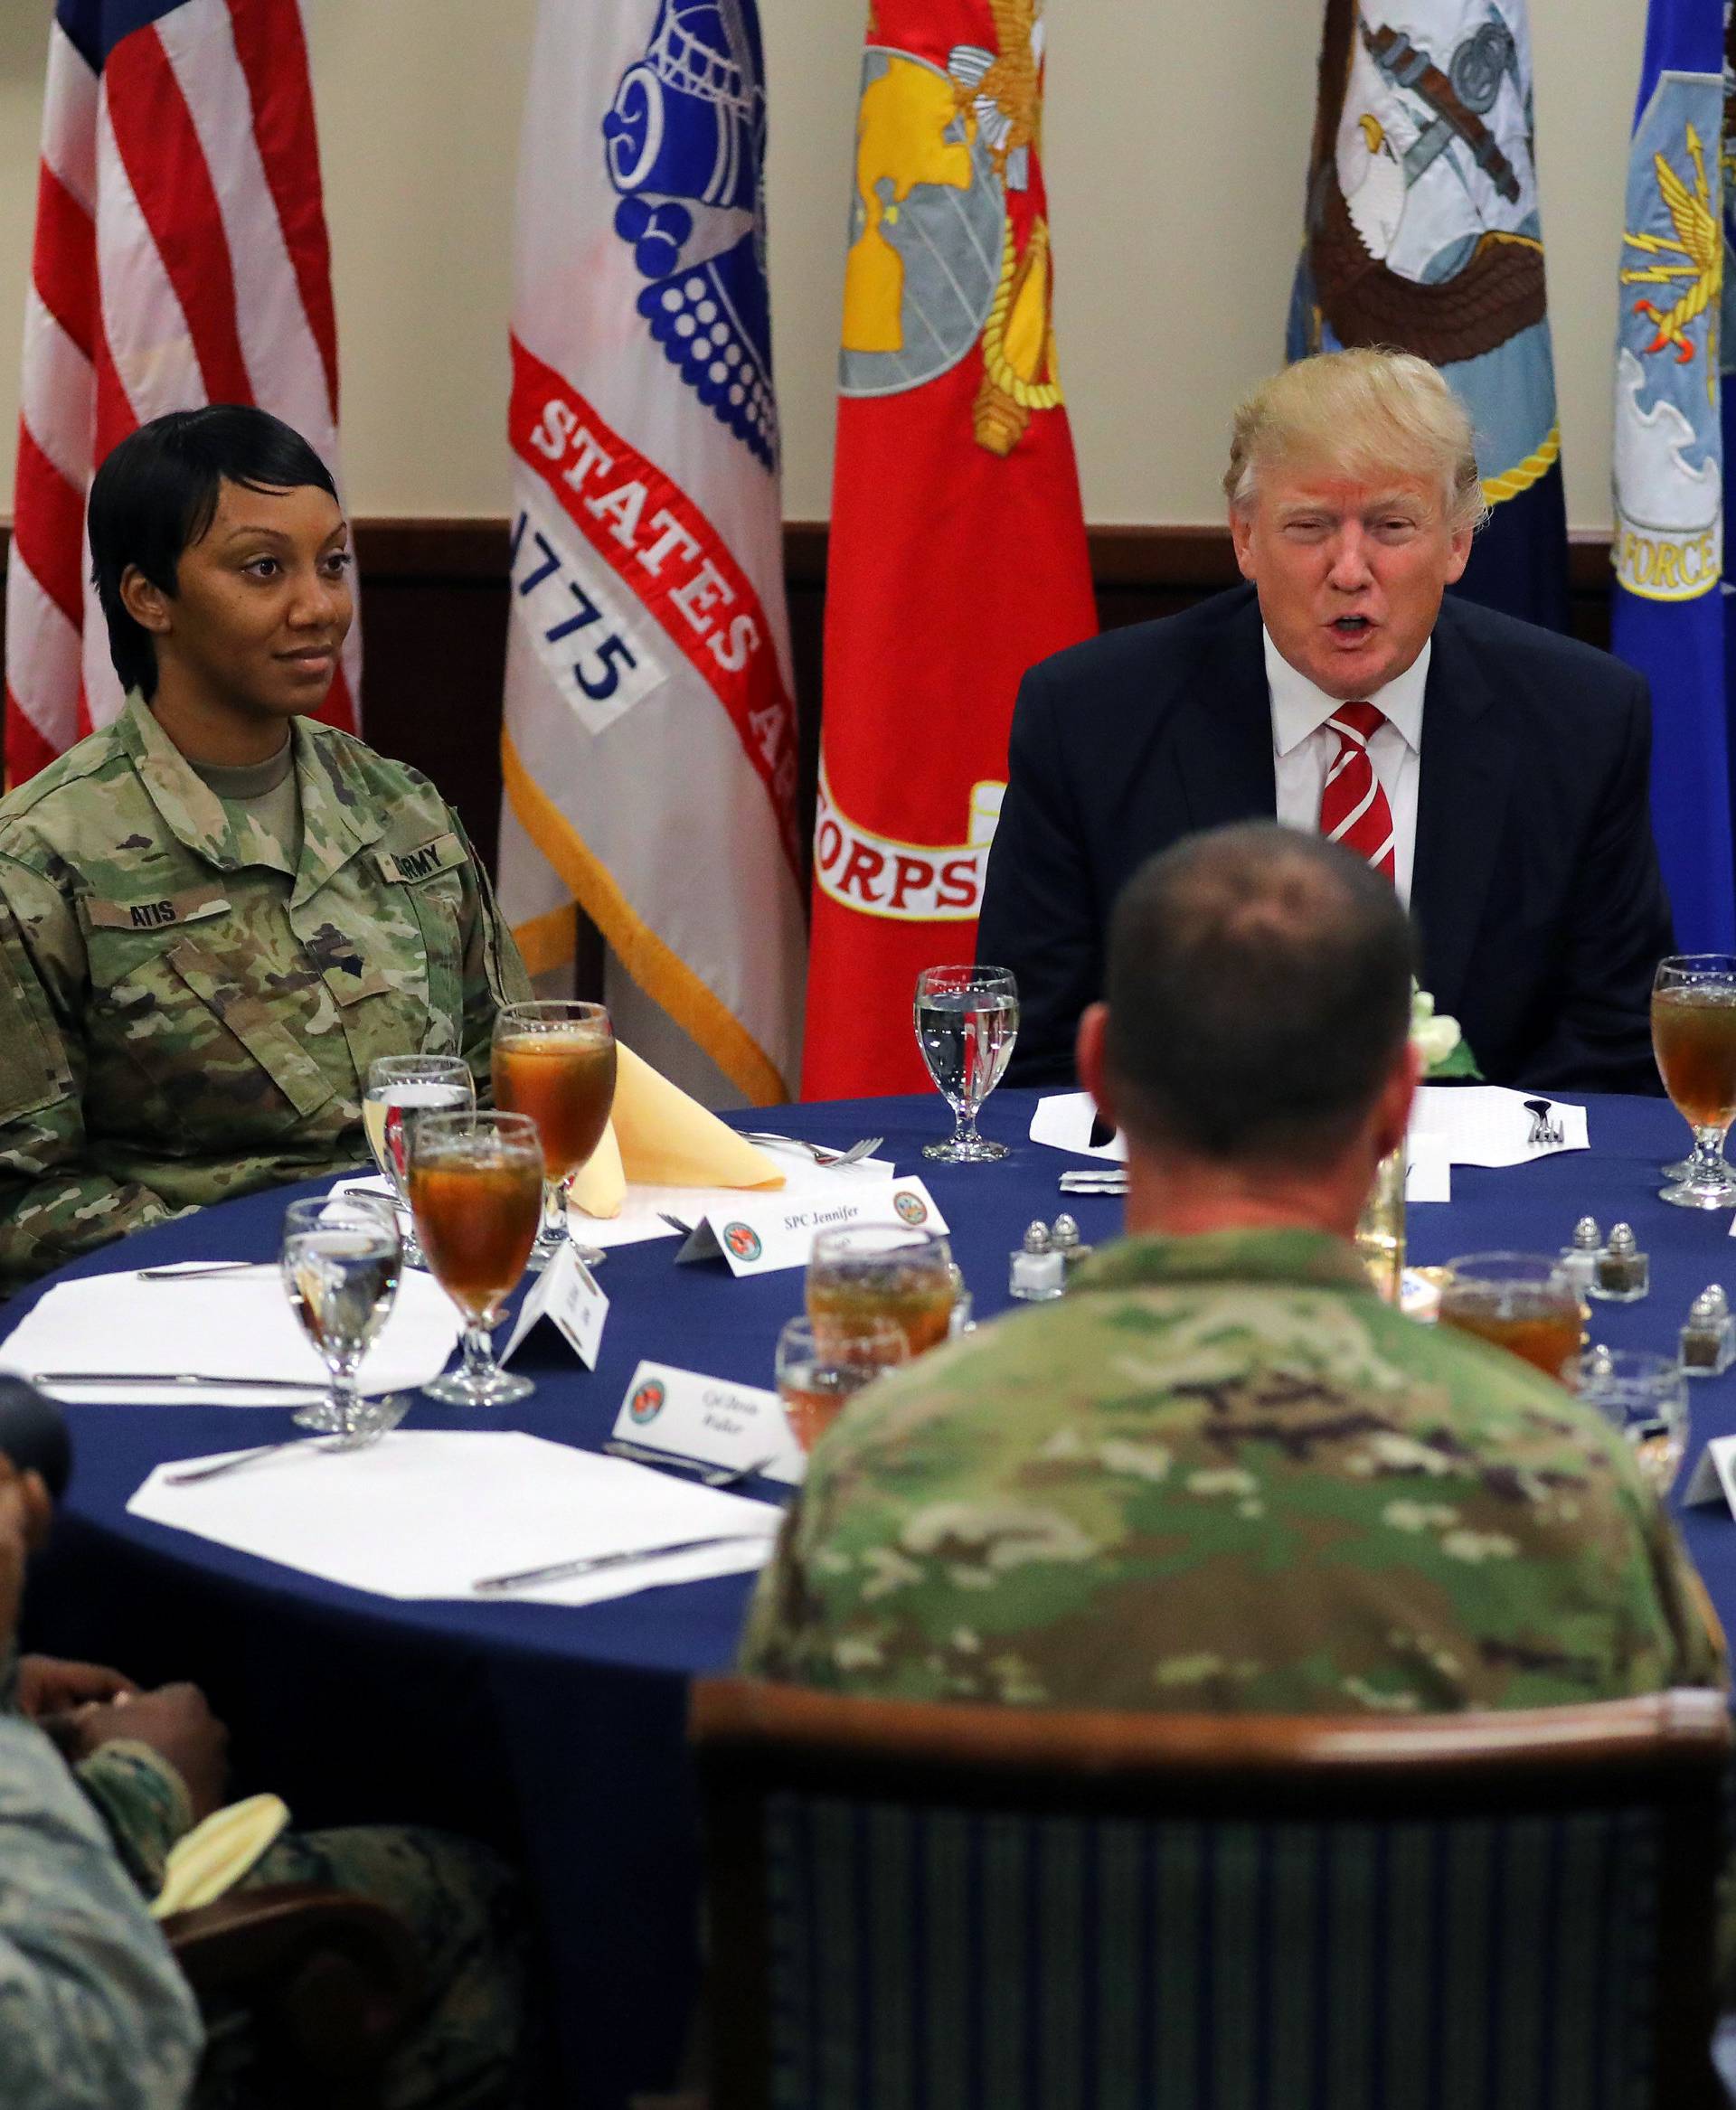 U.S. President Donald Trump attends a lunch with members of the U.S. military during a visit at the U.S. Central Command (CENTCOM) and Special Operations Command (SOCOM) headquarters in Tampa